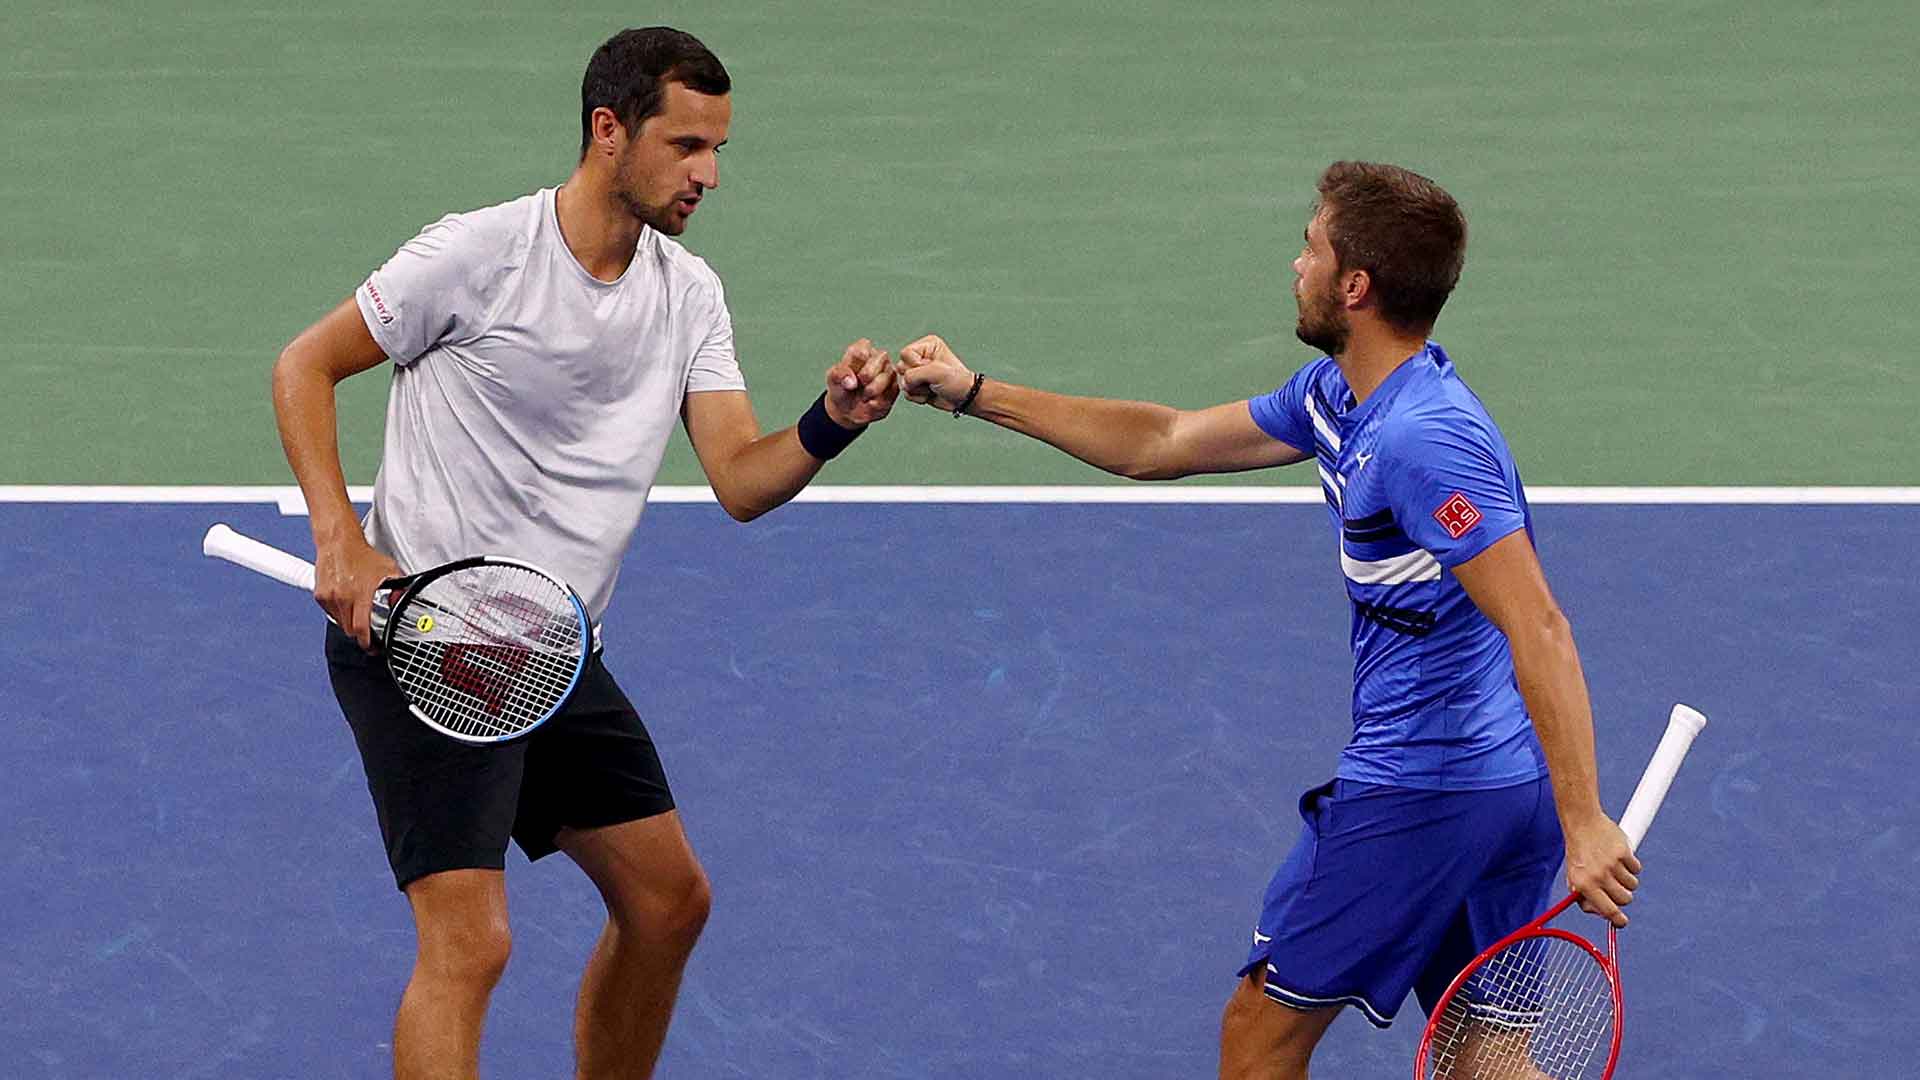 Mate Pavic and Nikola Mektic are fourth in the Pepperstone ATP Live Doubles Teams Rankings.